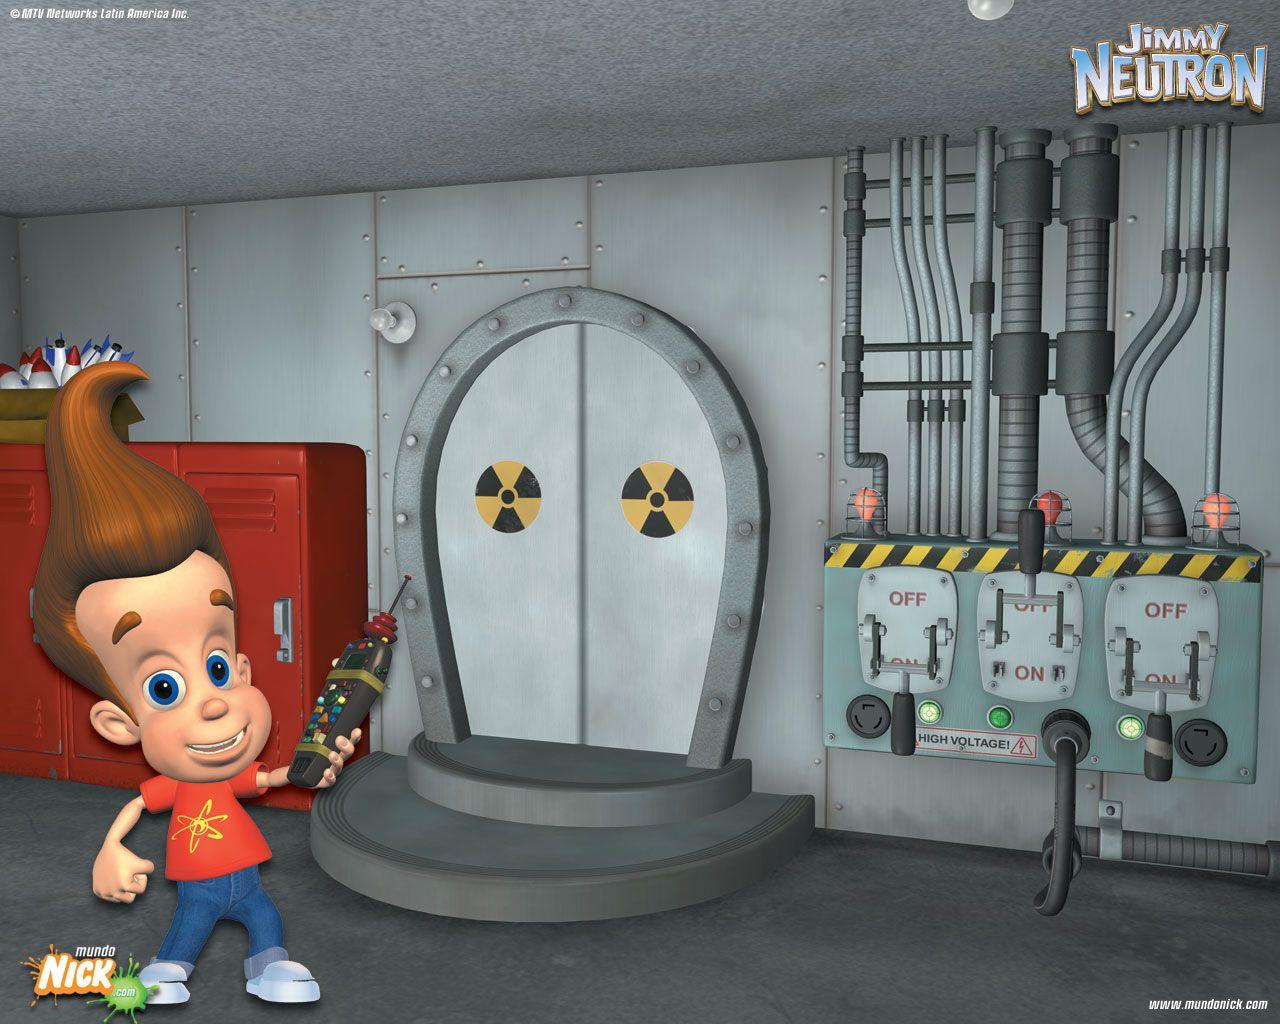 List of Jimmy Neutron's Inventions